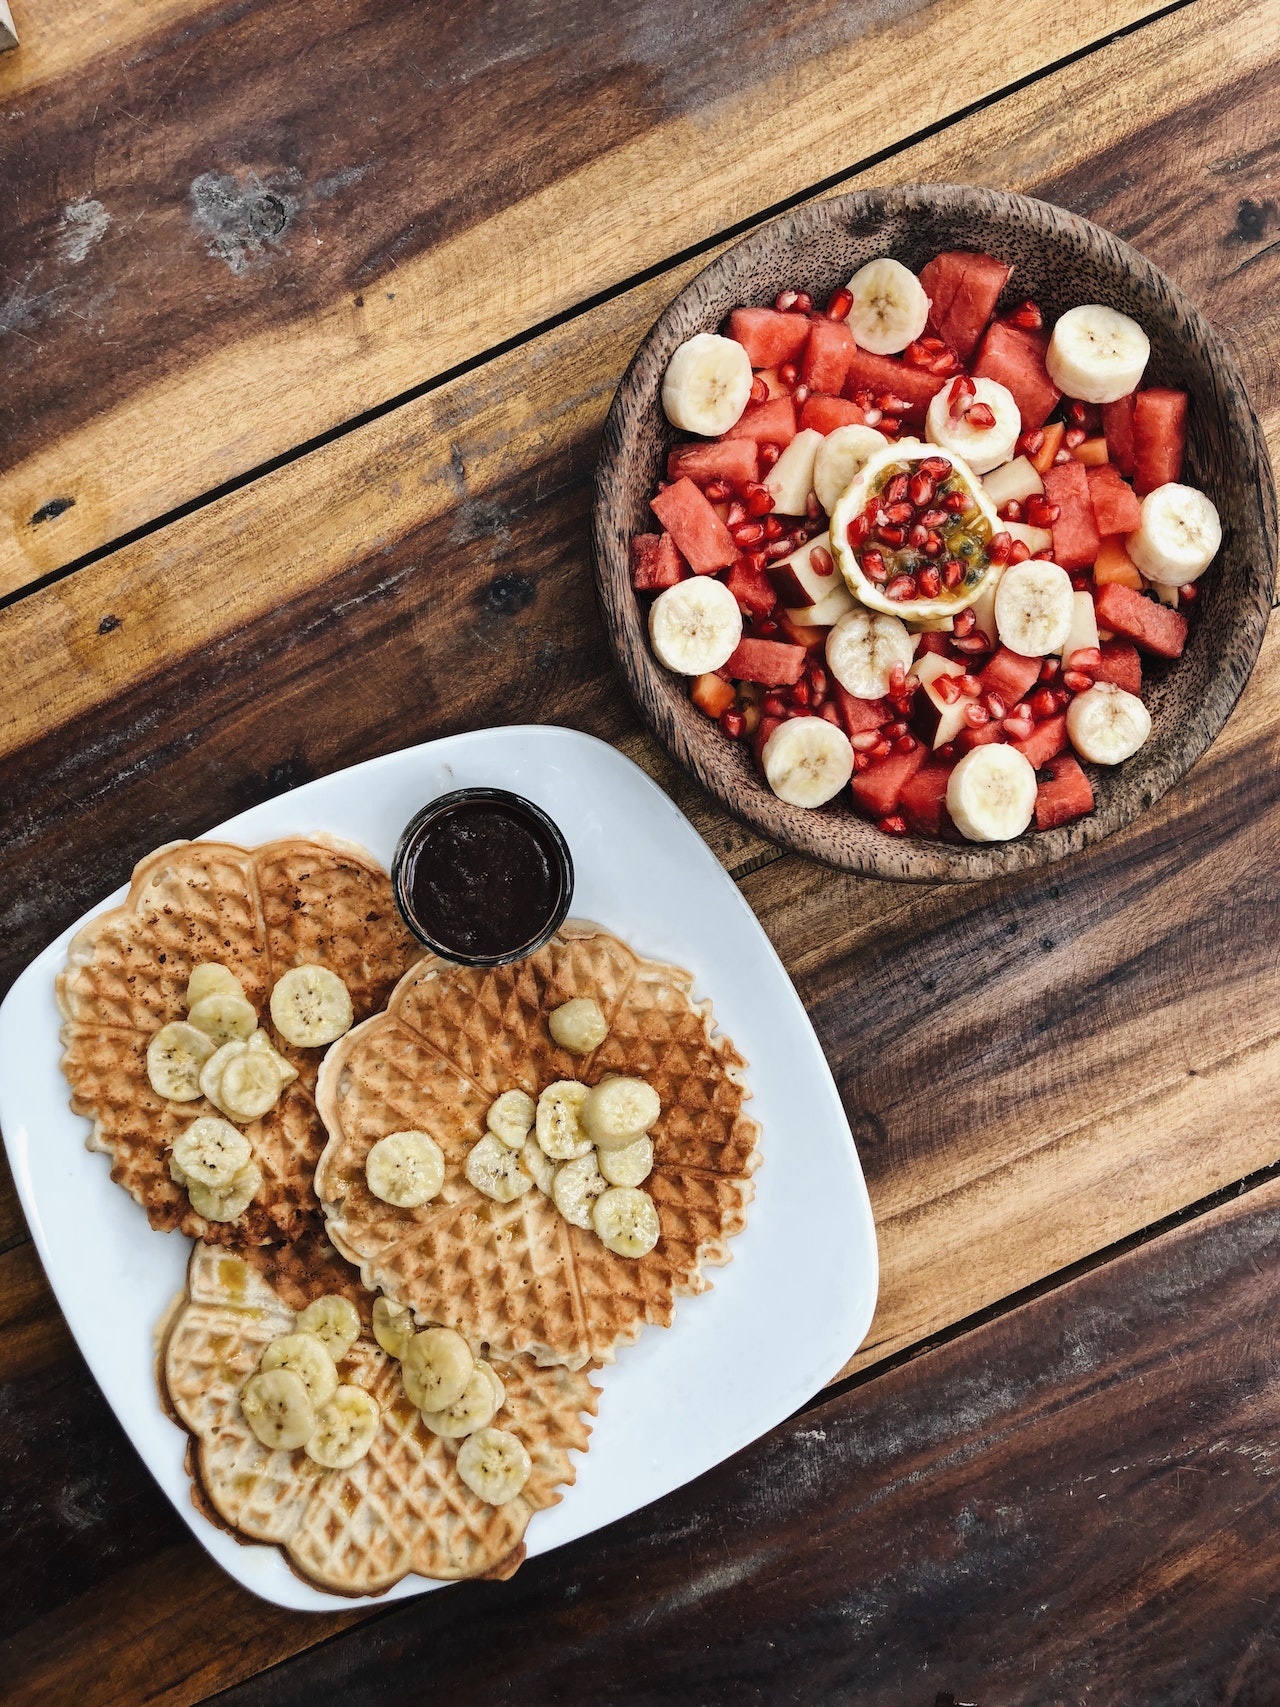 What Oil Do I Use on a Waffle Iron